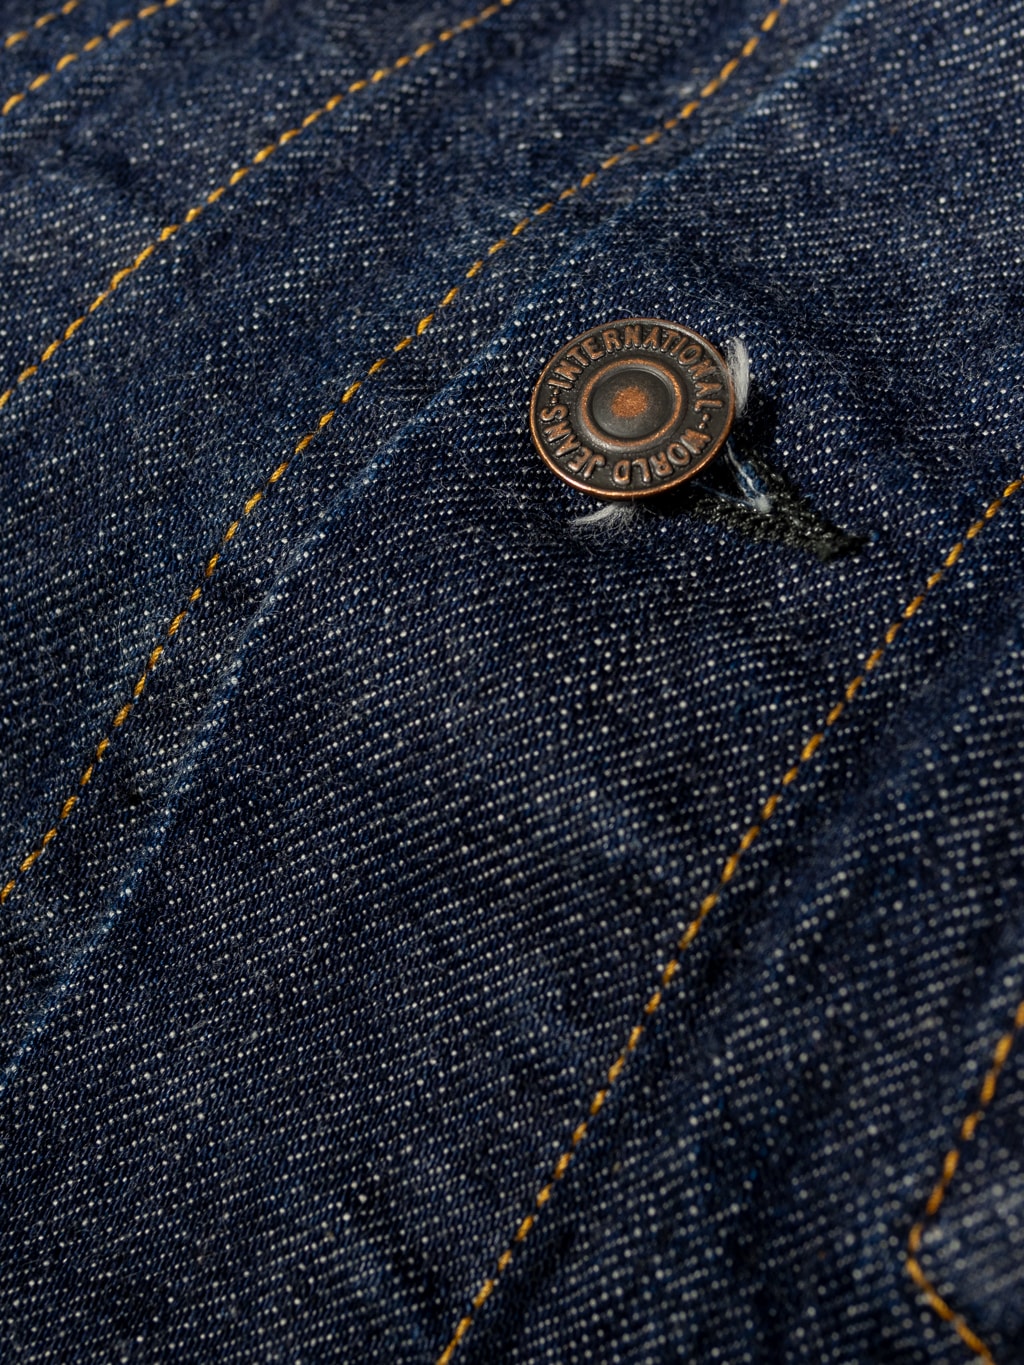 tcb jeans 60s type 3 denim jacket iron buttons